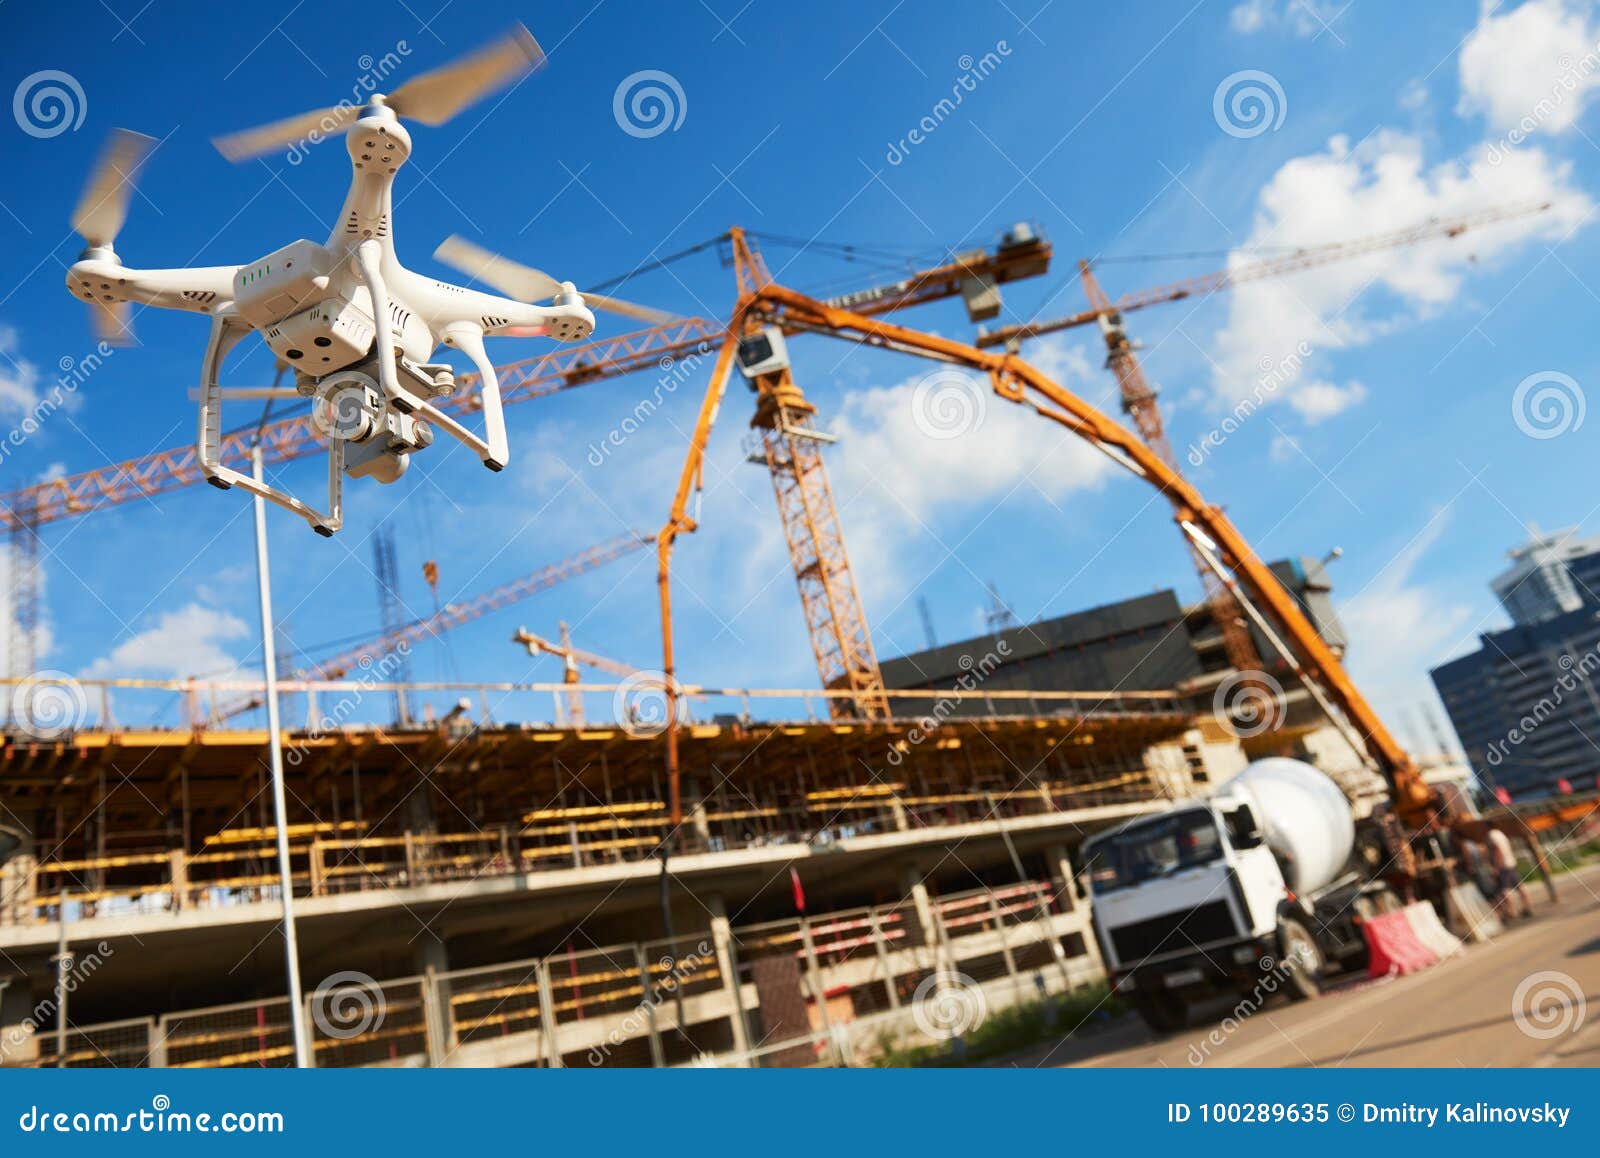 drone over construction site. video surveillance or industrial inspection